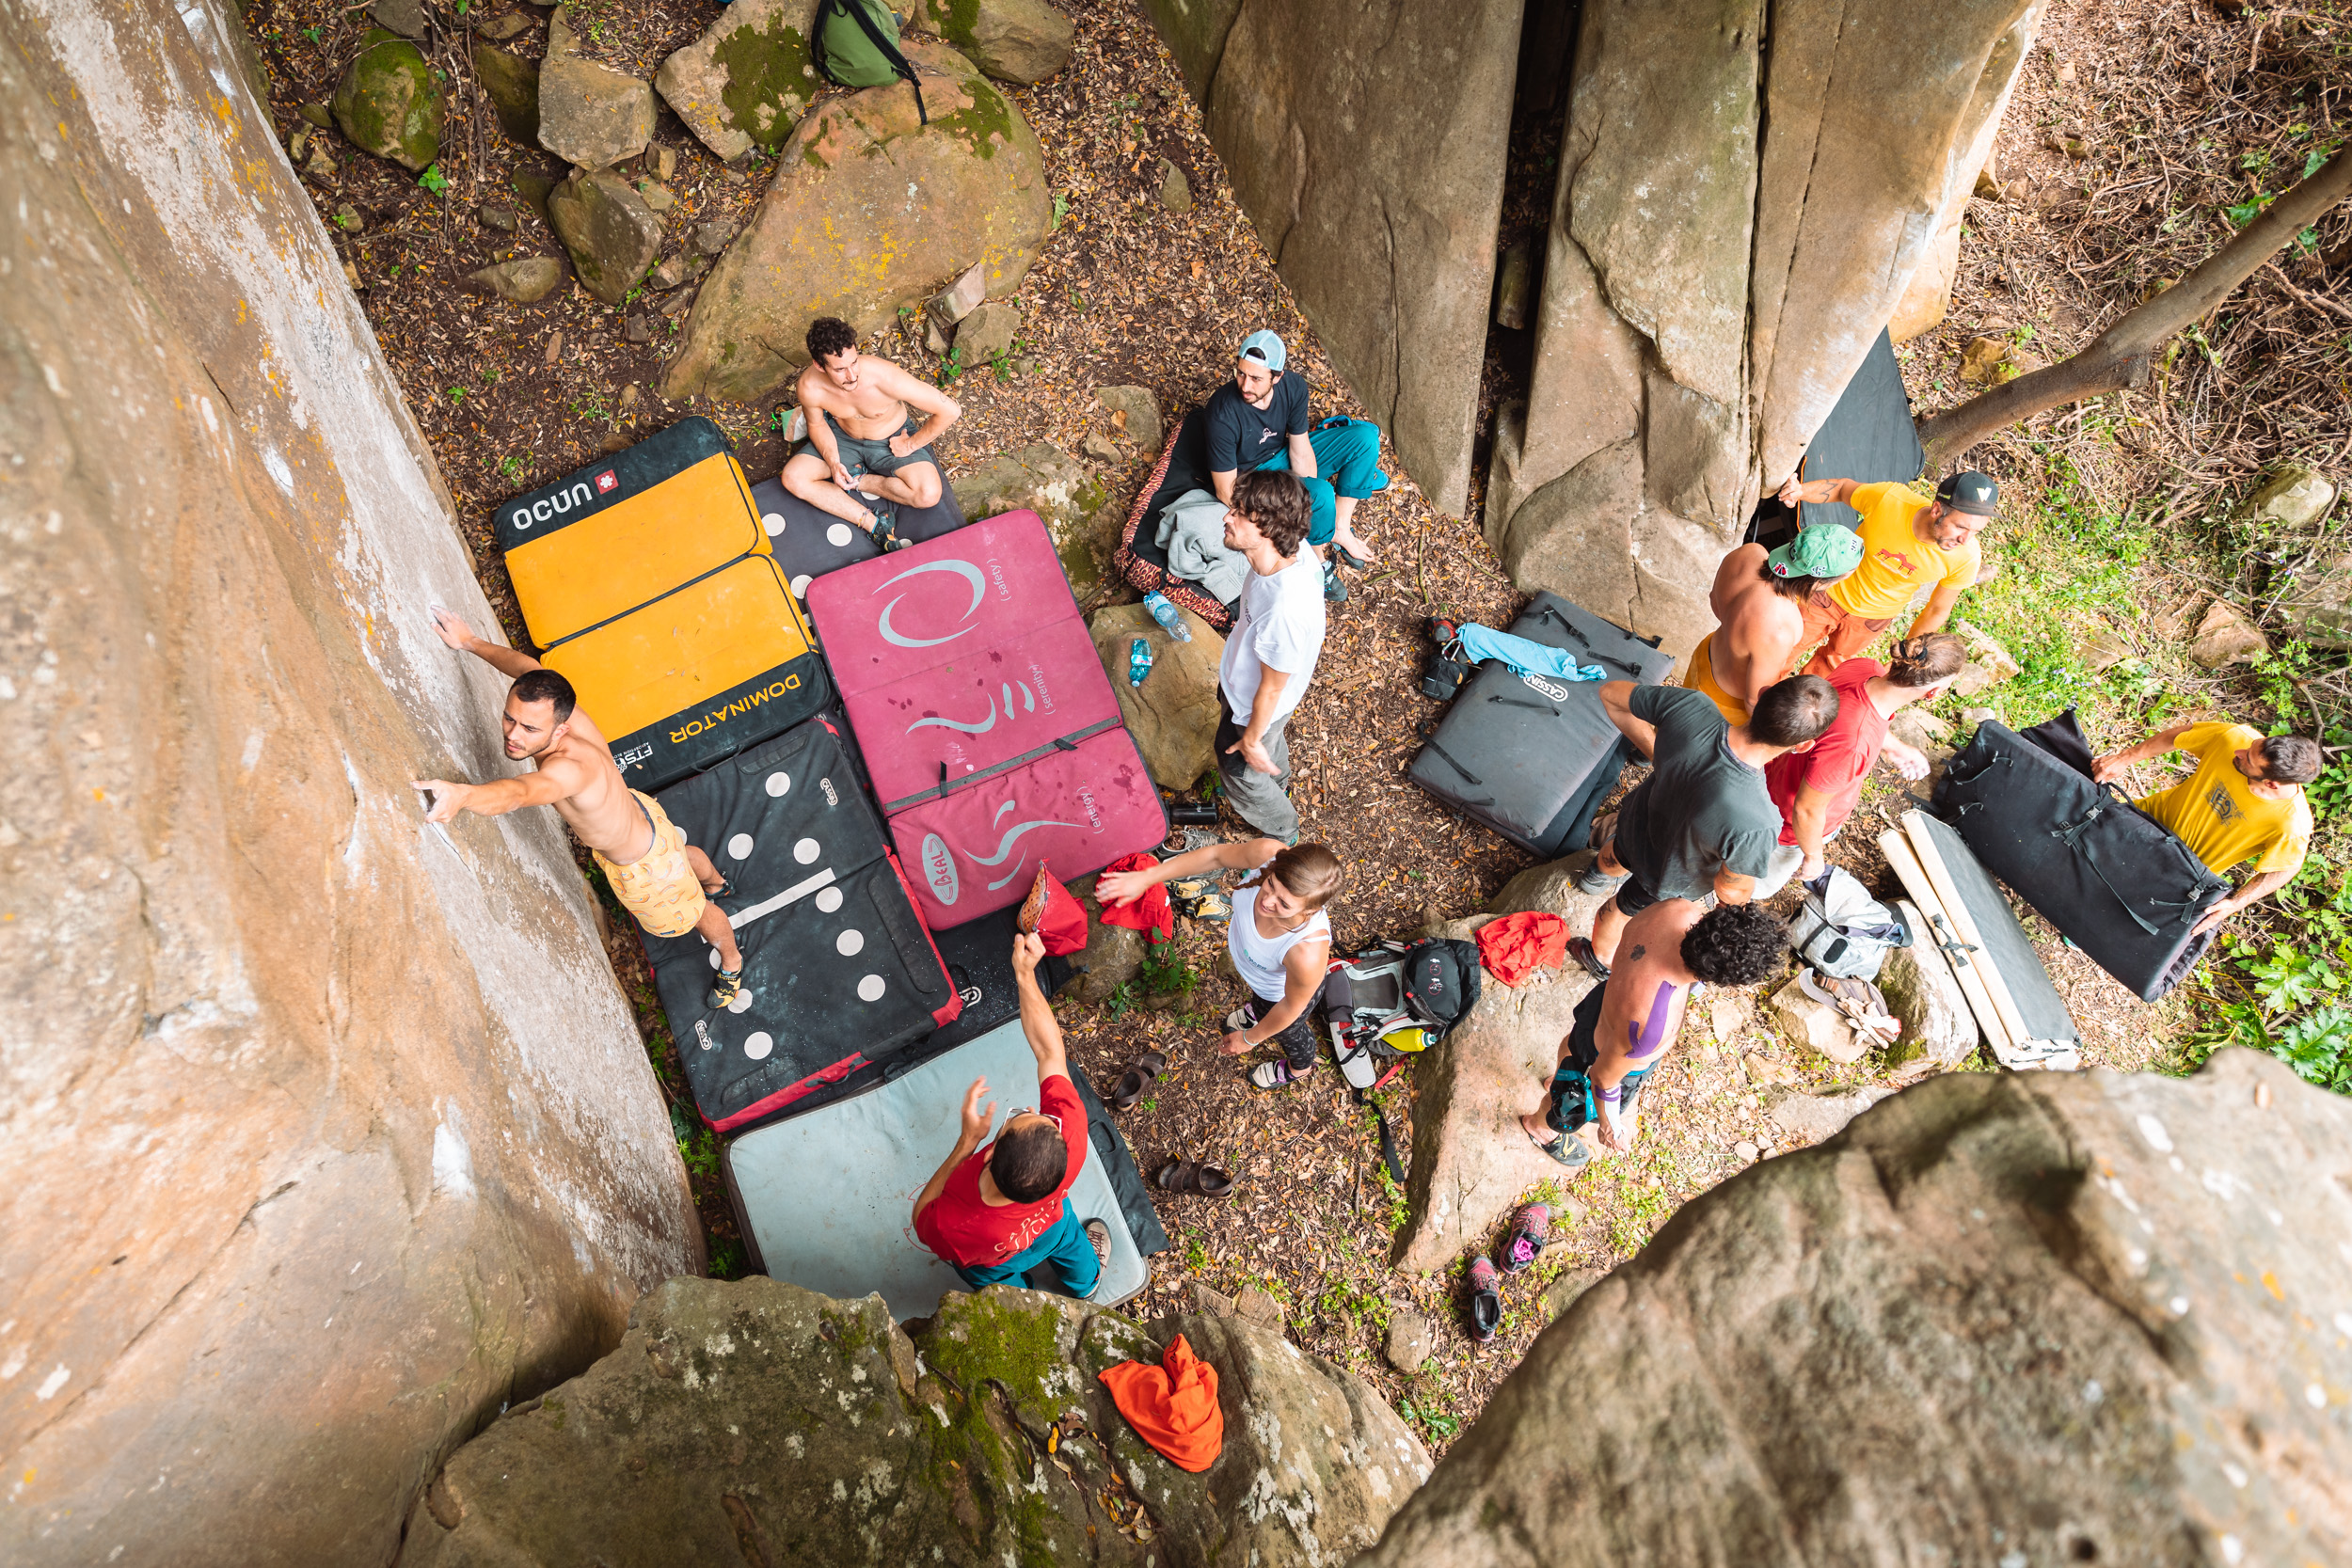 A group of rock climbers bouldering in Western Sicily